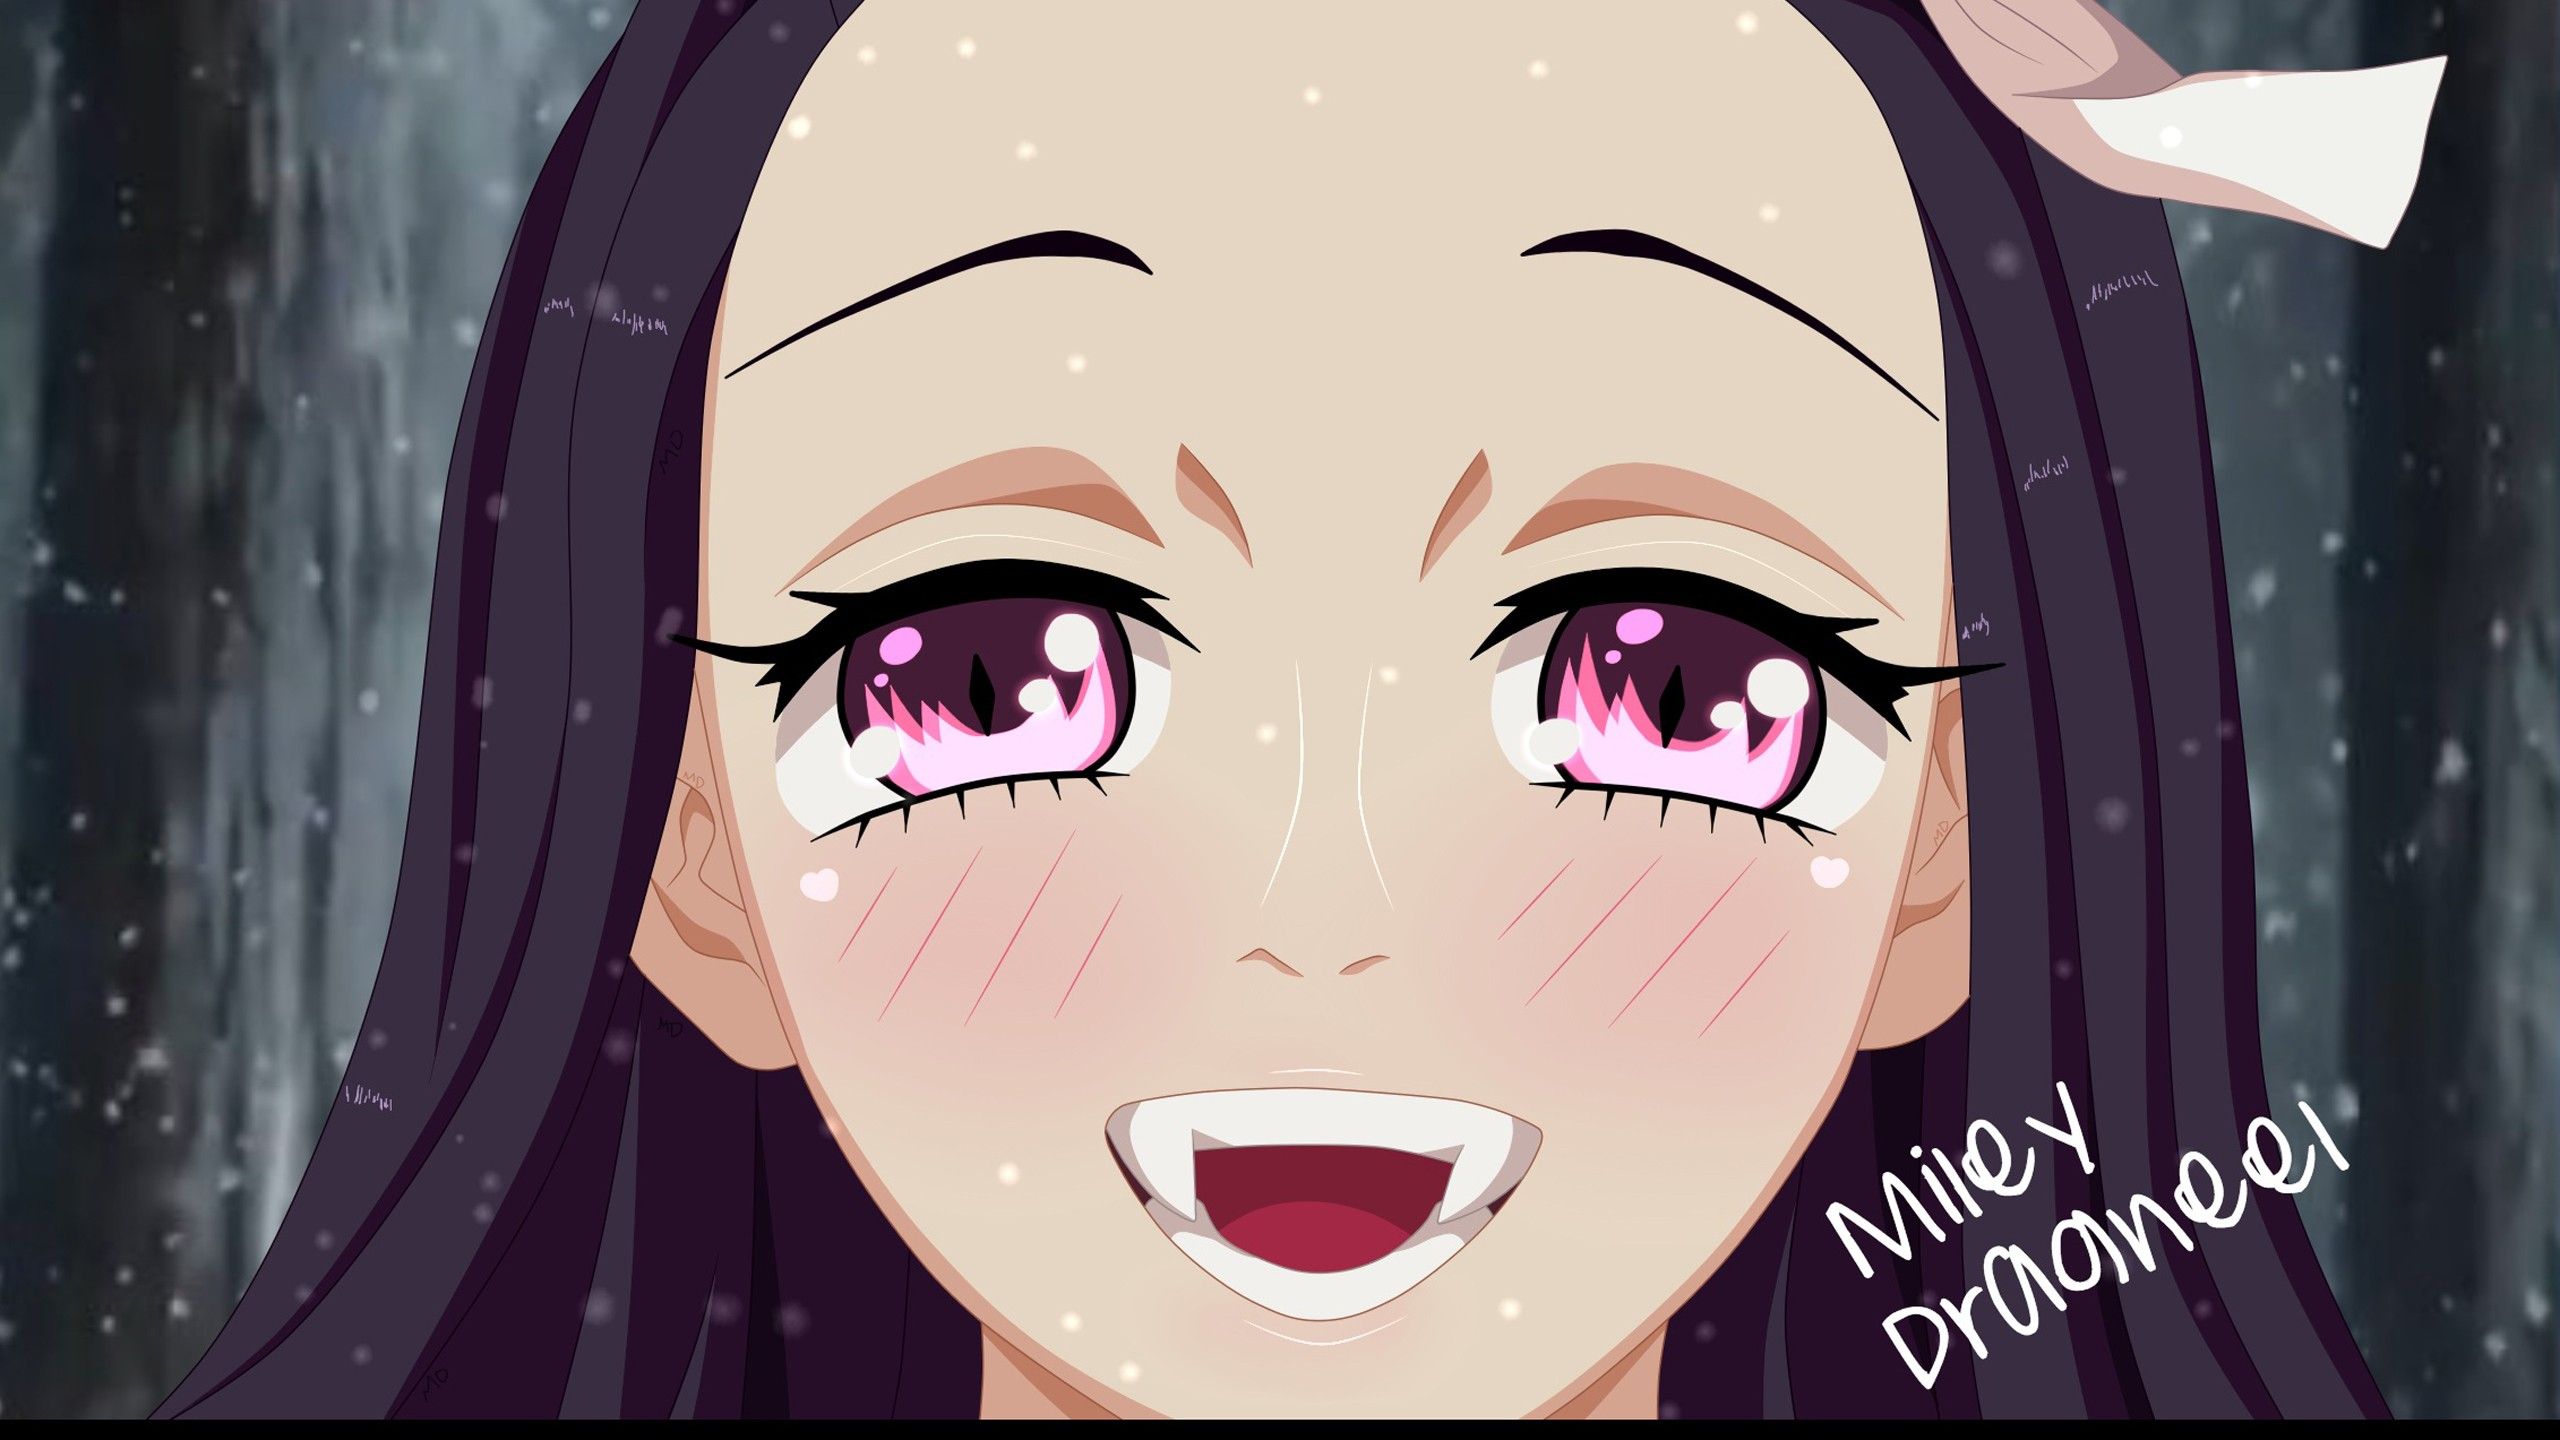 Demon Slayer Nezuko Kamado With Pink Eyes With Background Of Snow Falling And Trees HD Anime Wallpaper